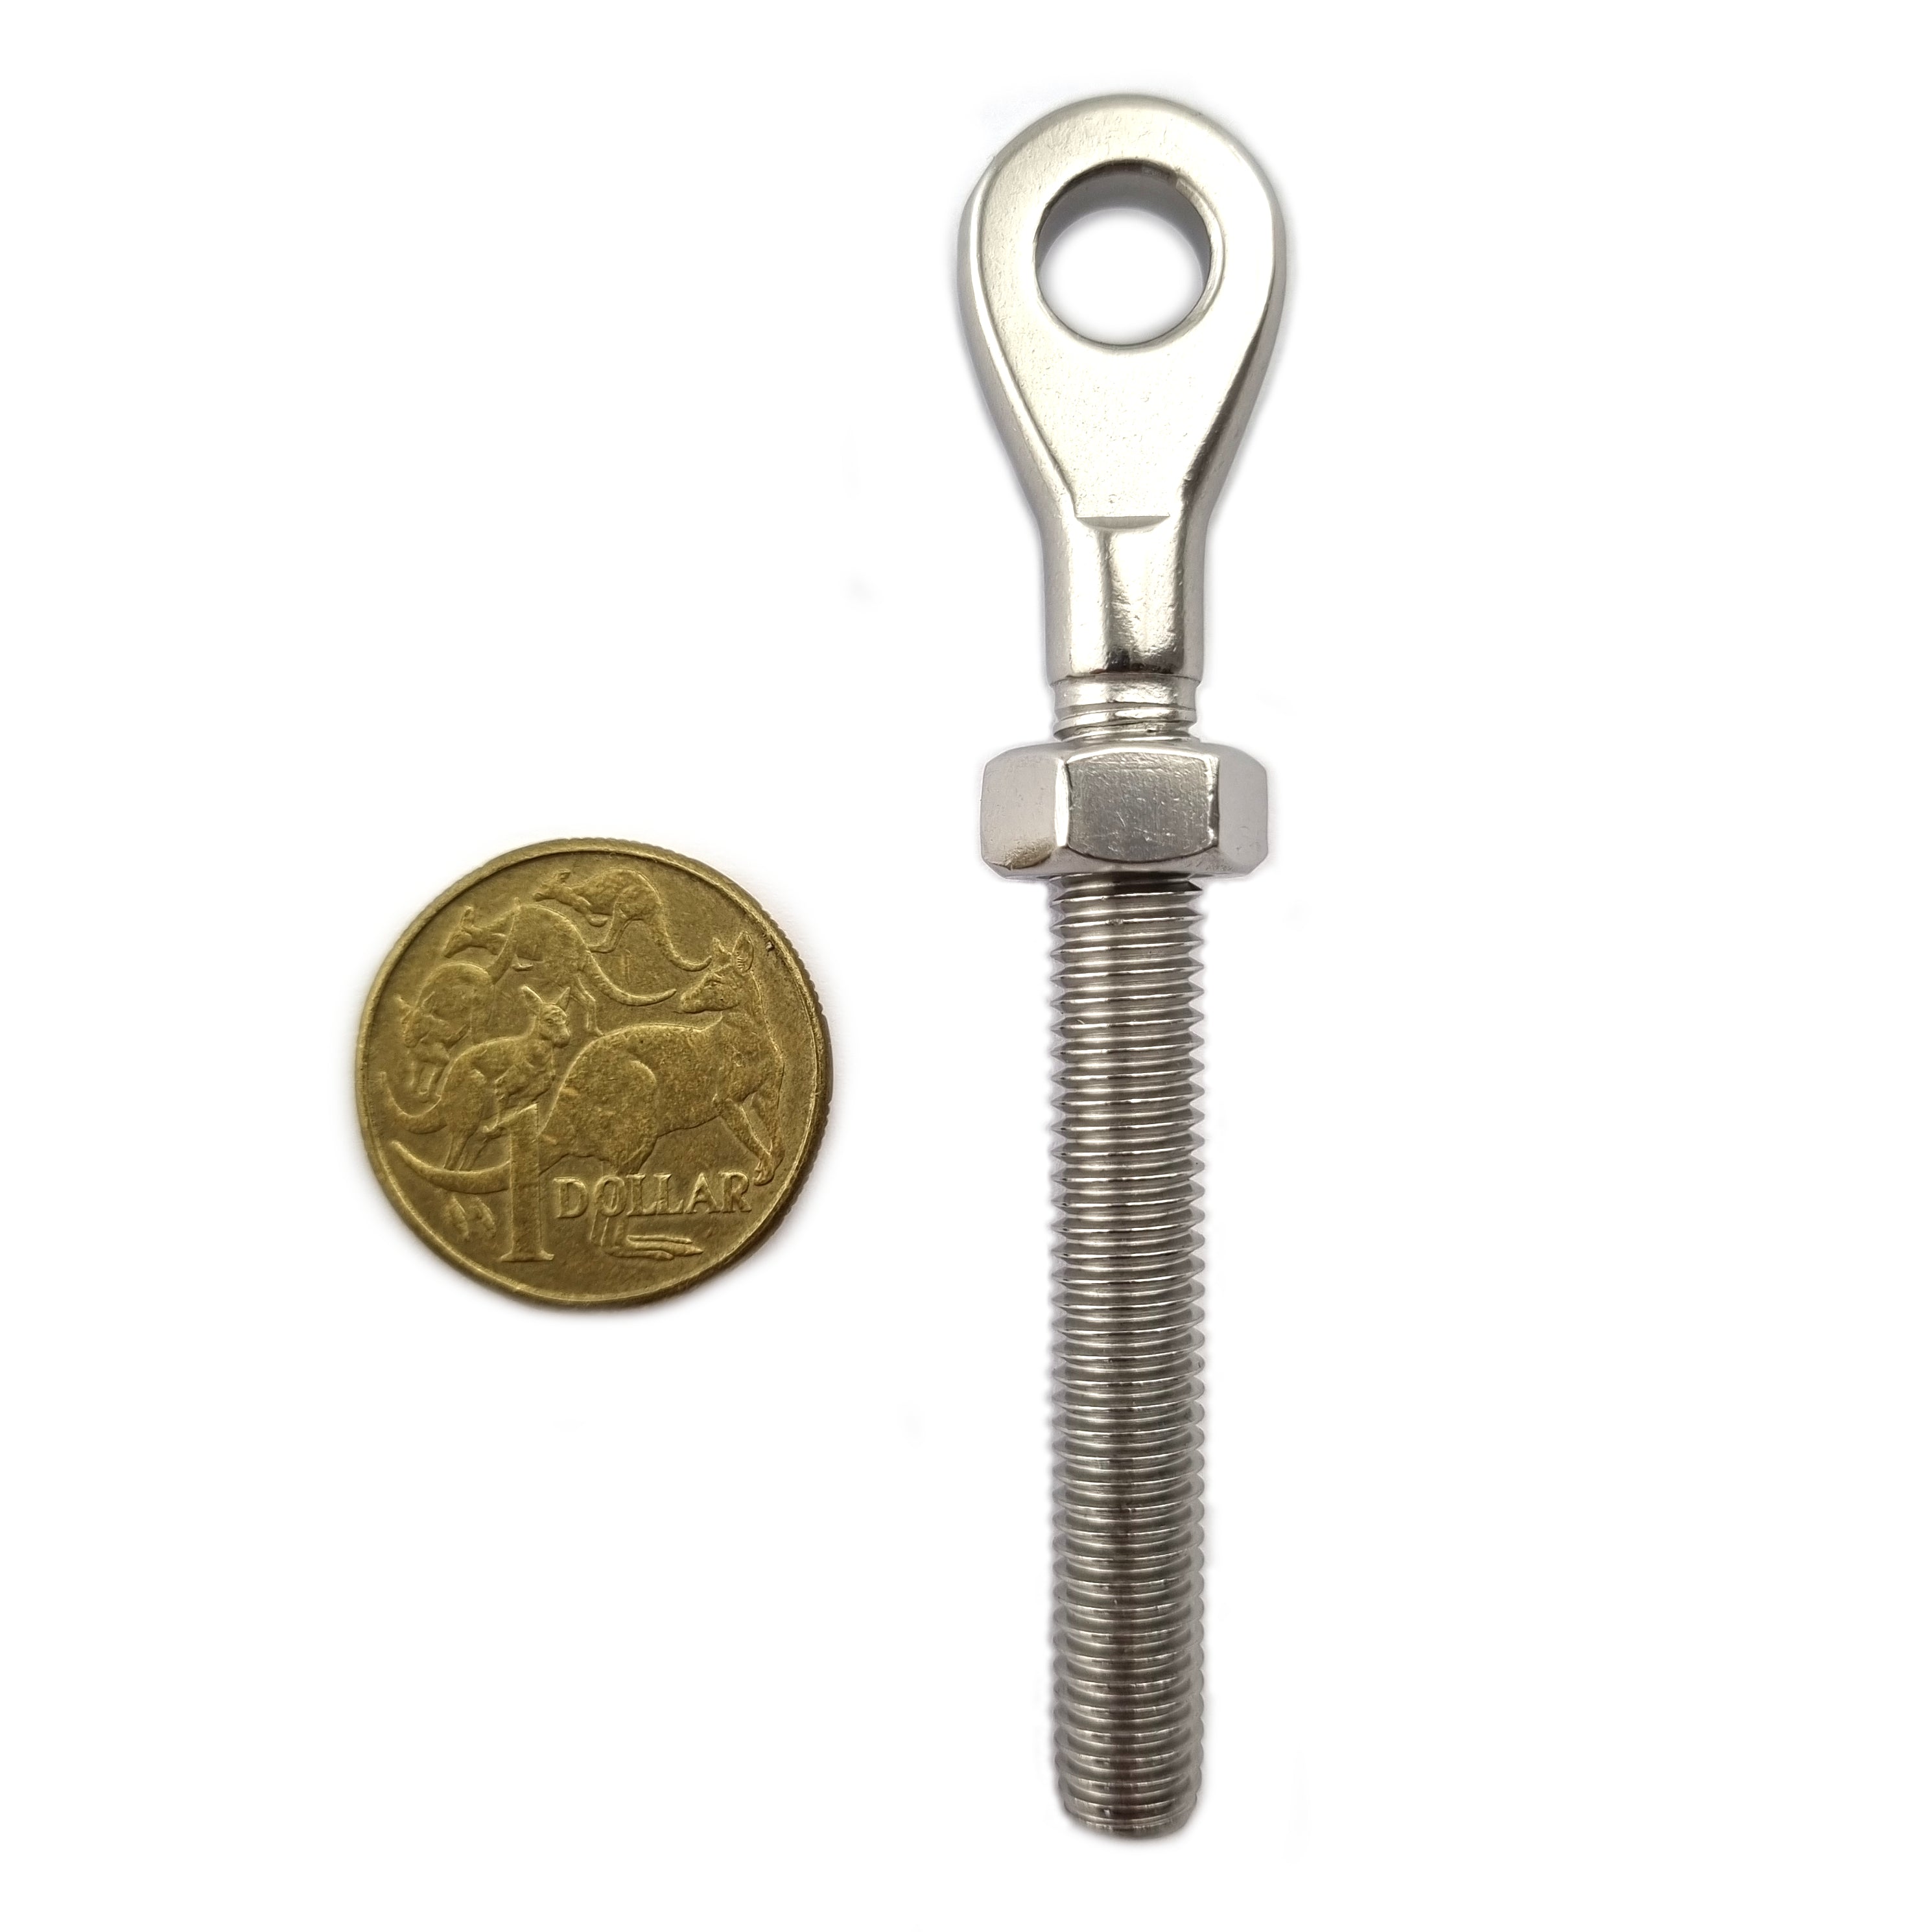 8mm Eye Terminal, Stainless Steel with a 56mm thread. Shop chain.com.au